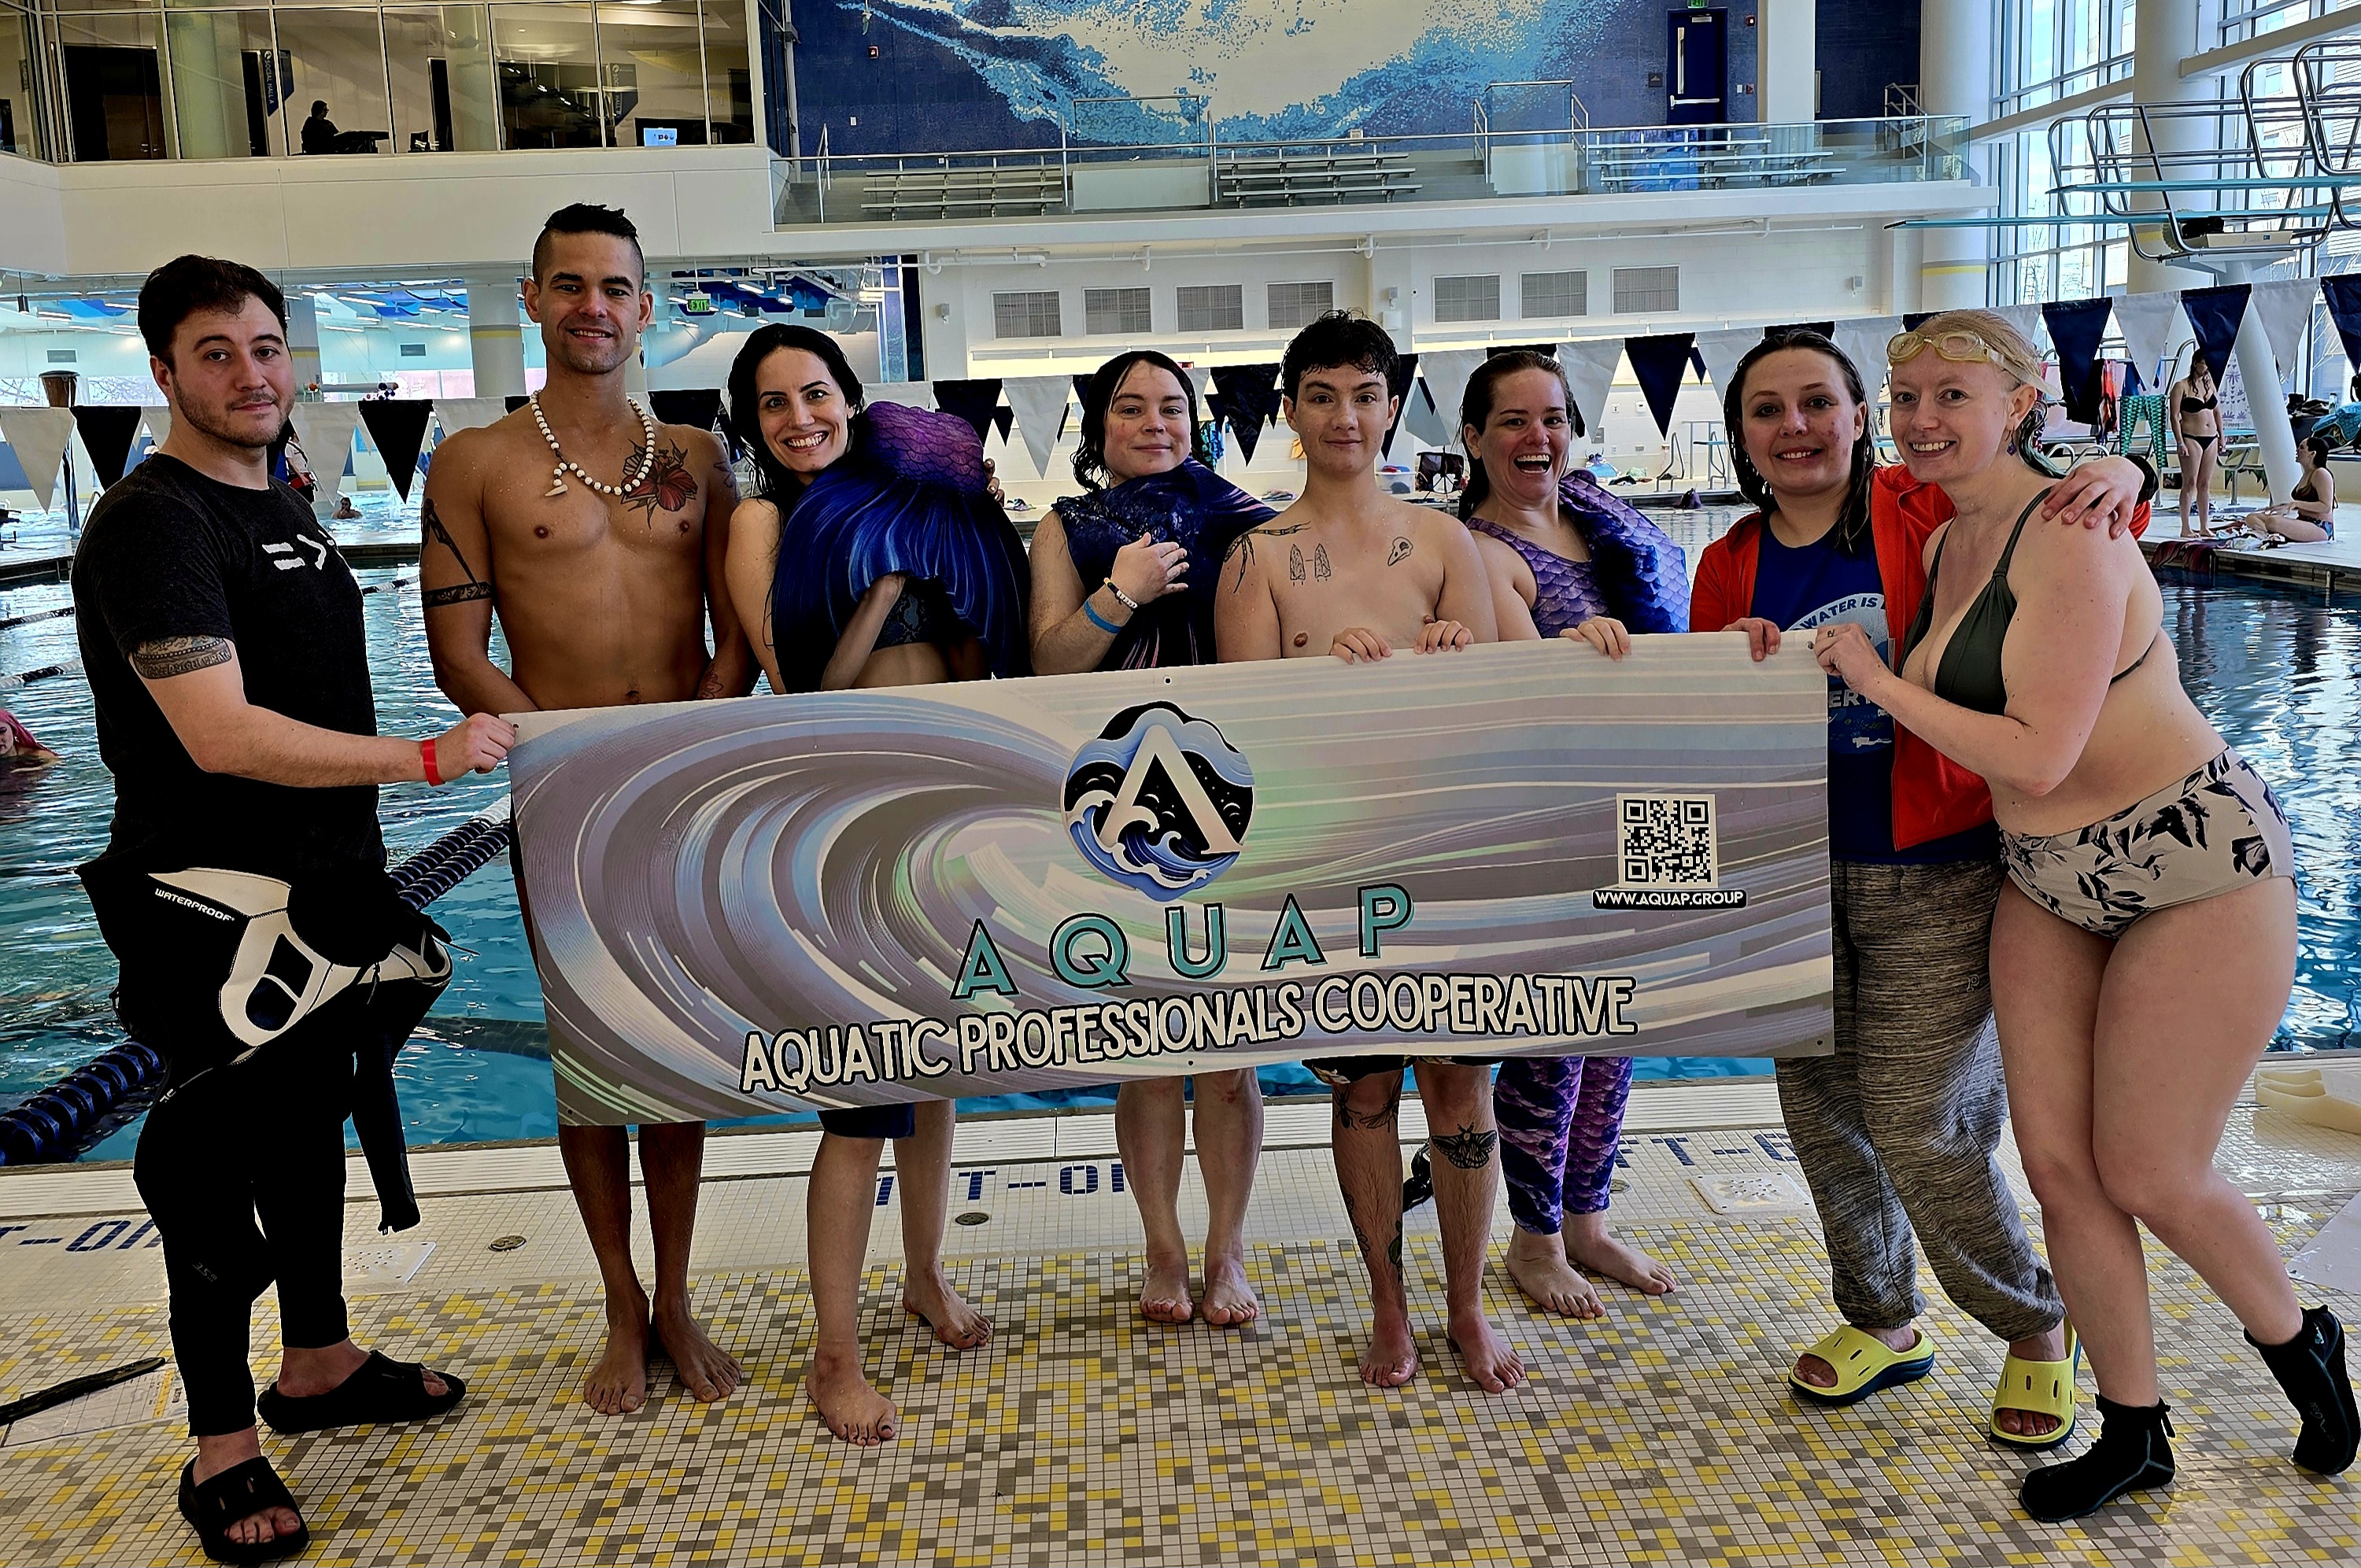 Successful mermaid certification recipients hold up the Aquap banner